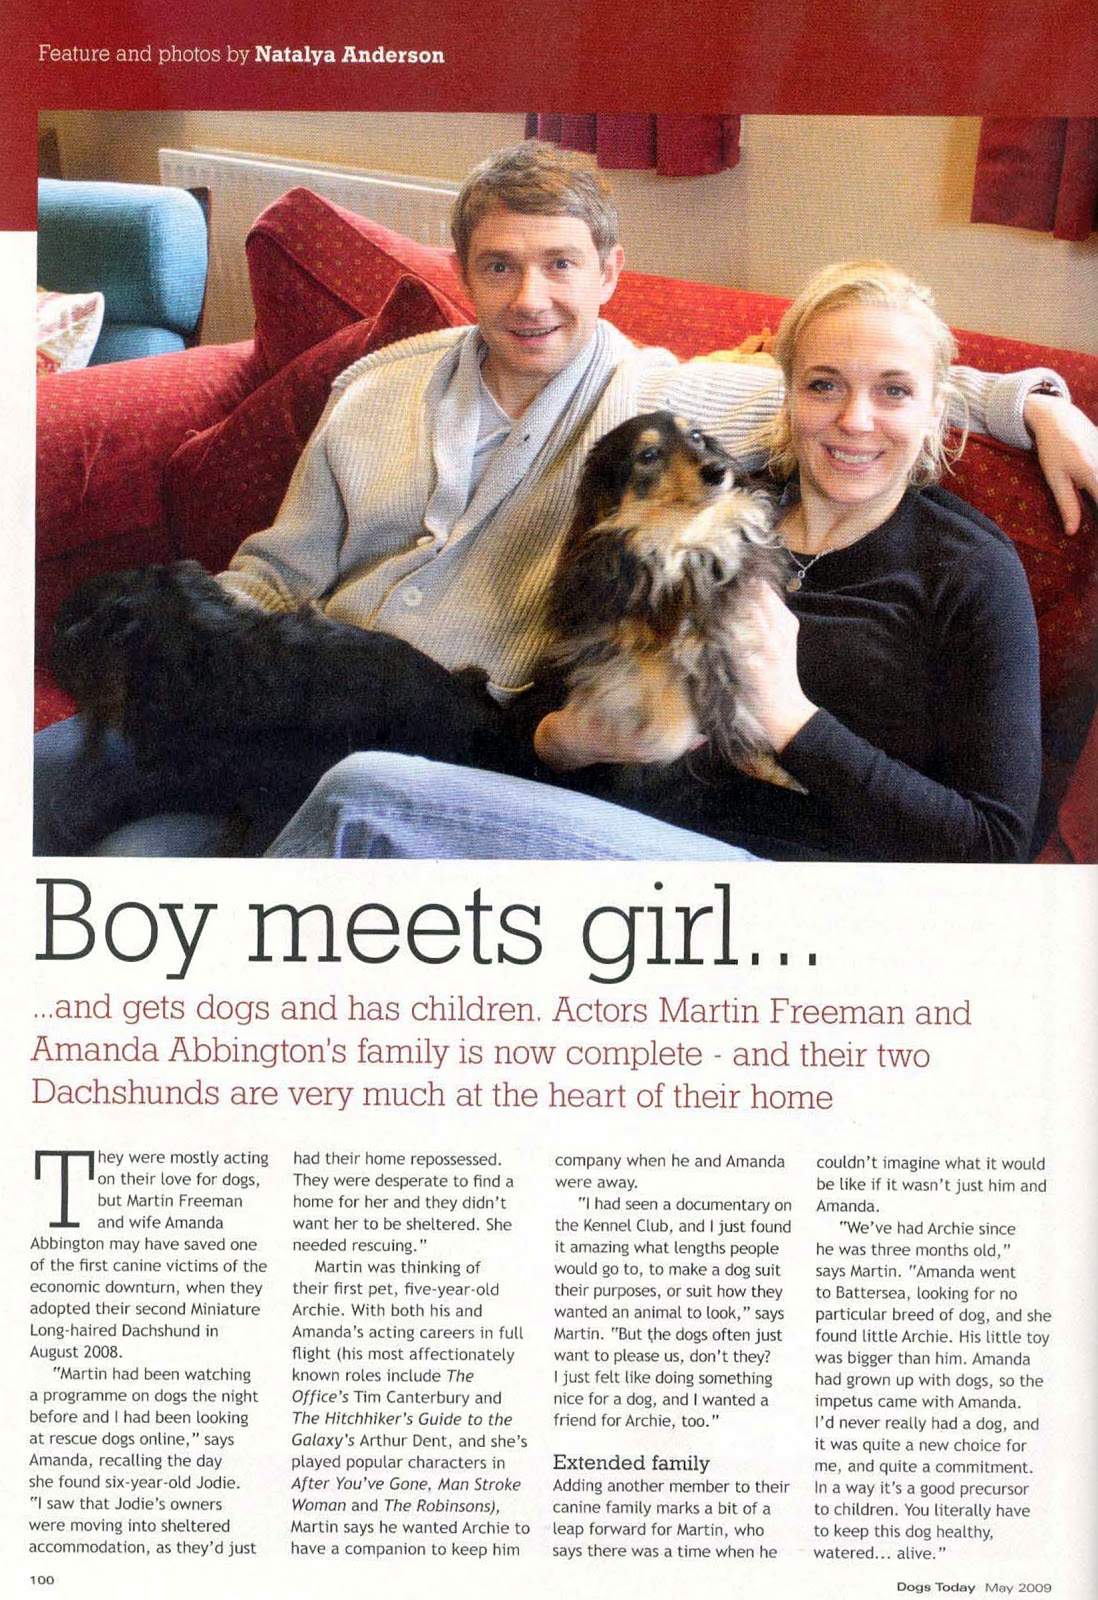 Martin Freeman adopted Dachshunds interview